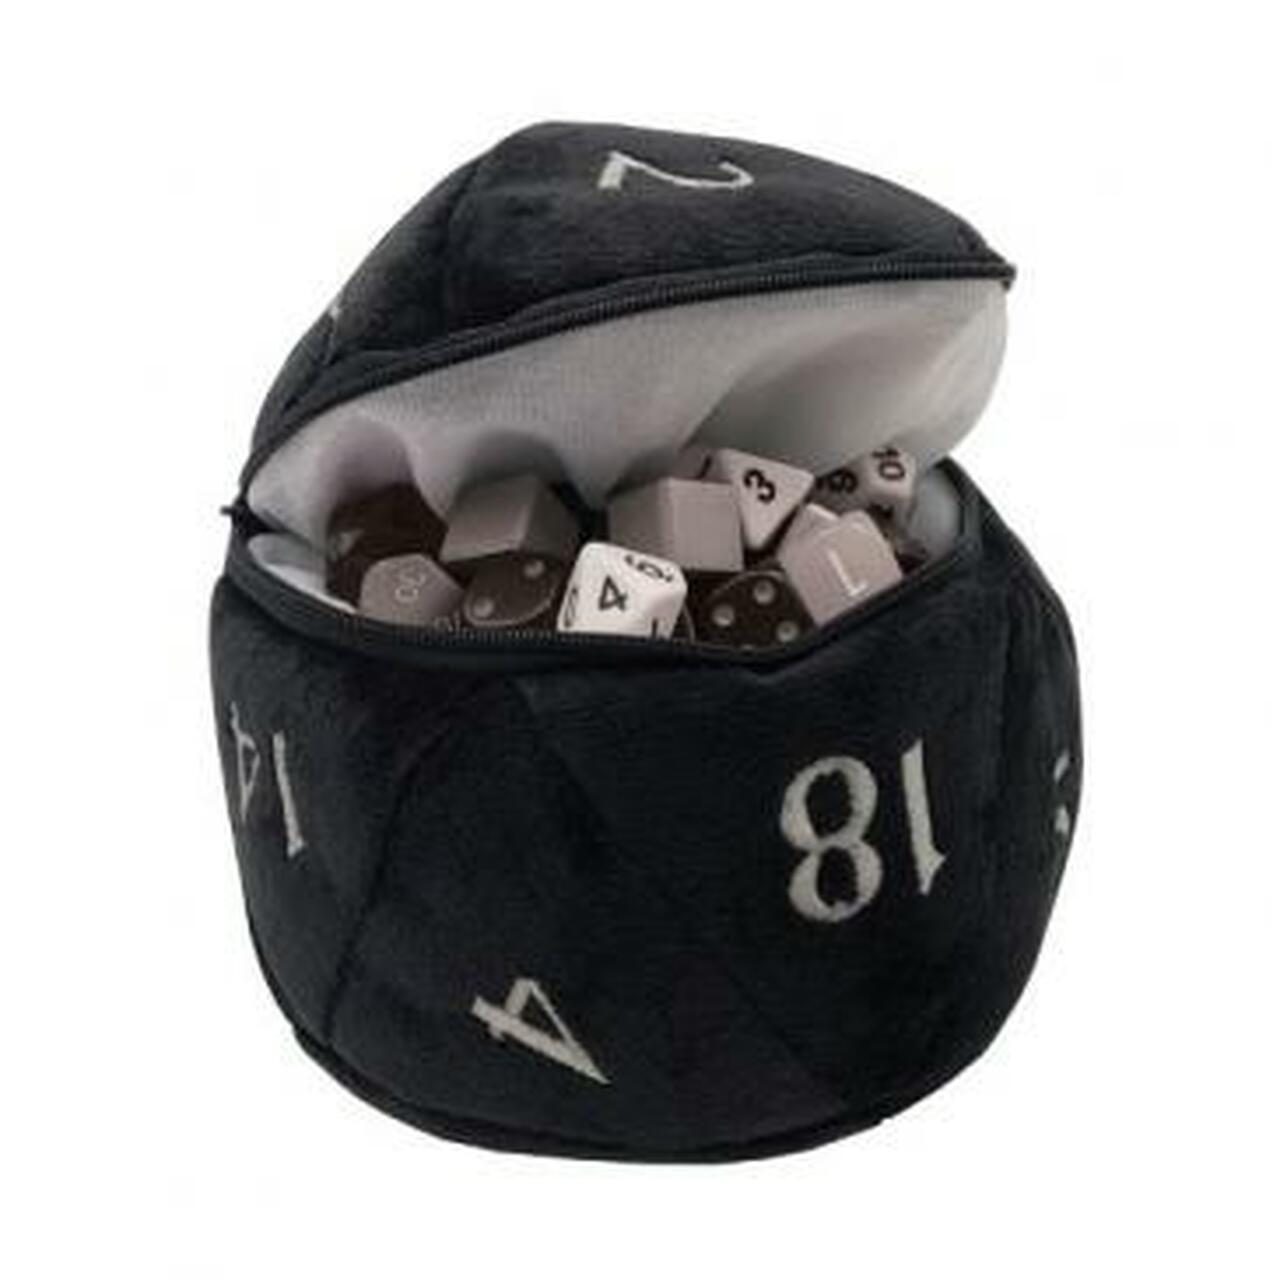 Dice bag D20 Black and White